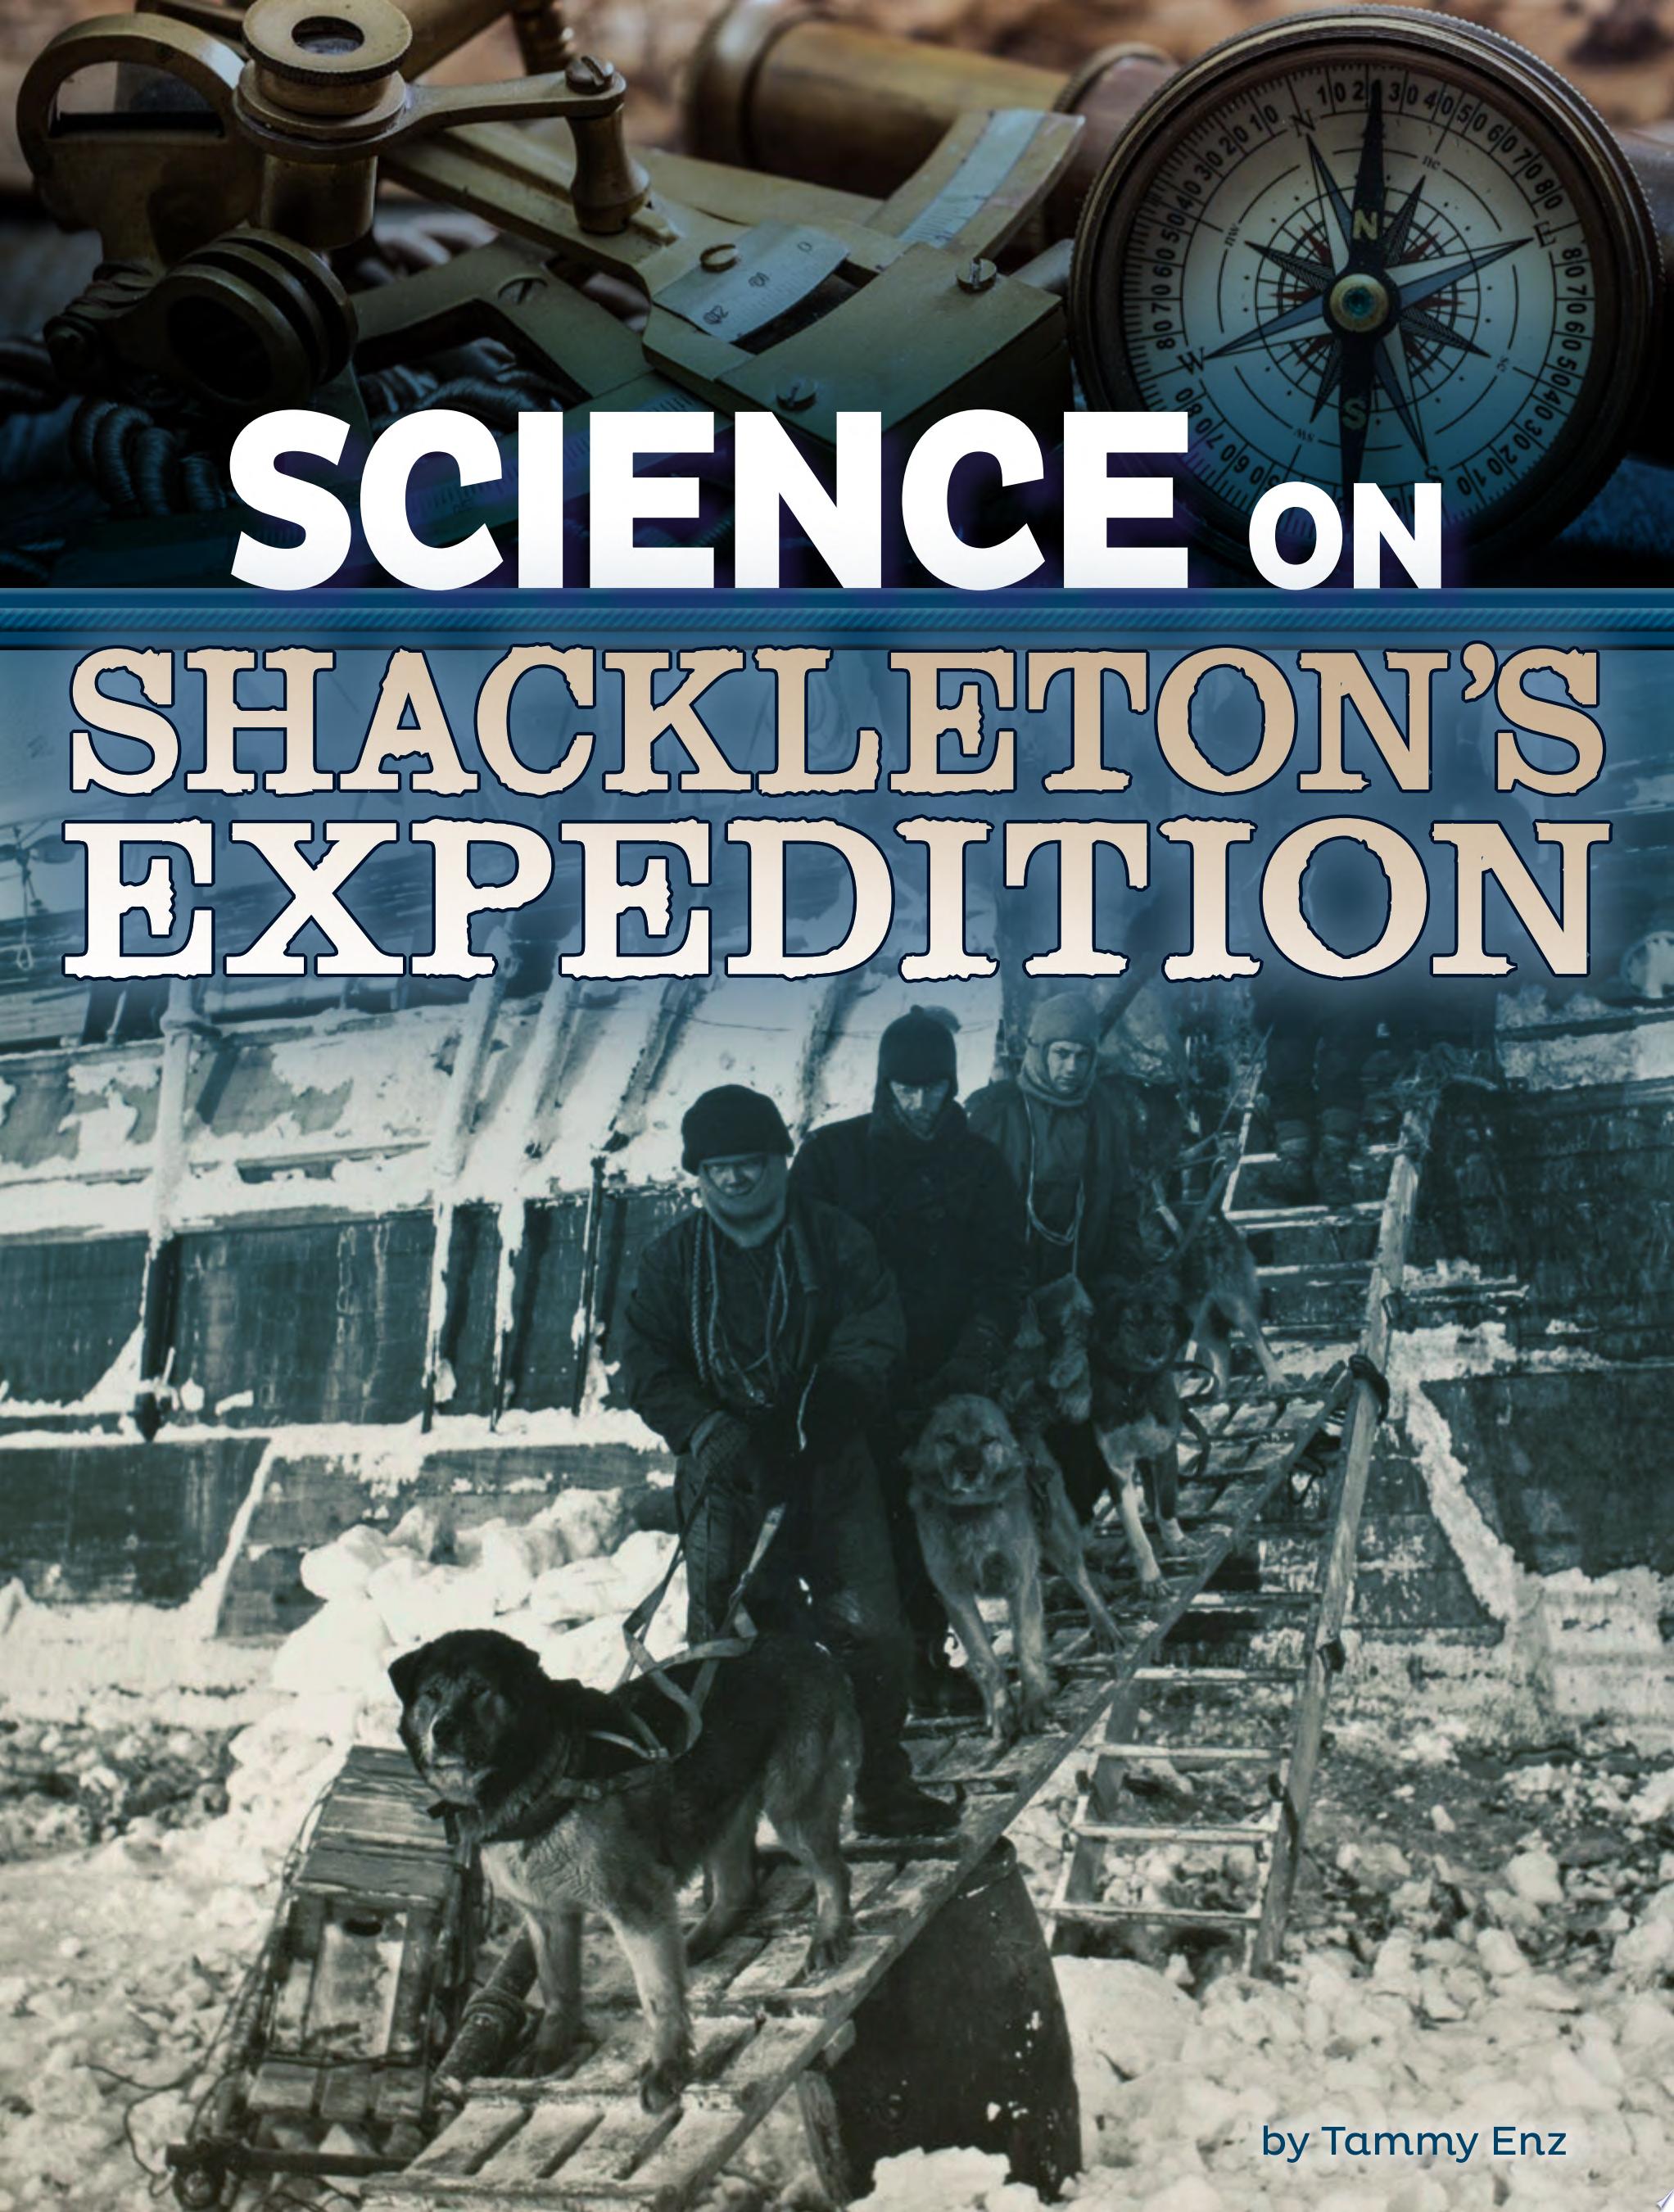 Image for "Science on Shackleton's Expedition"